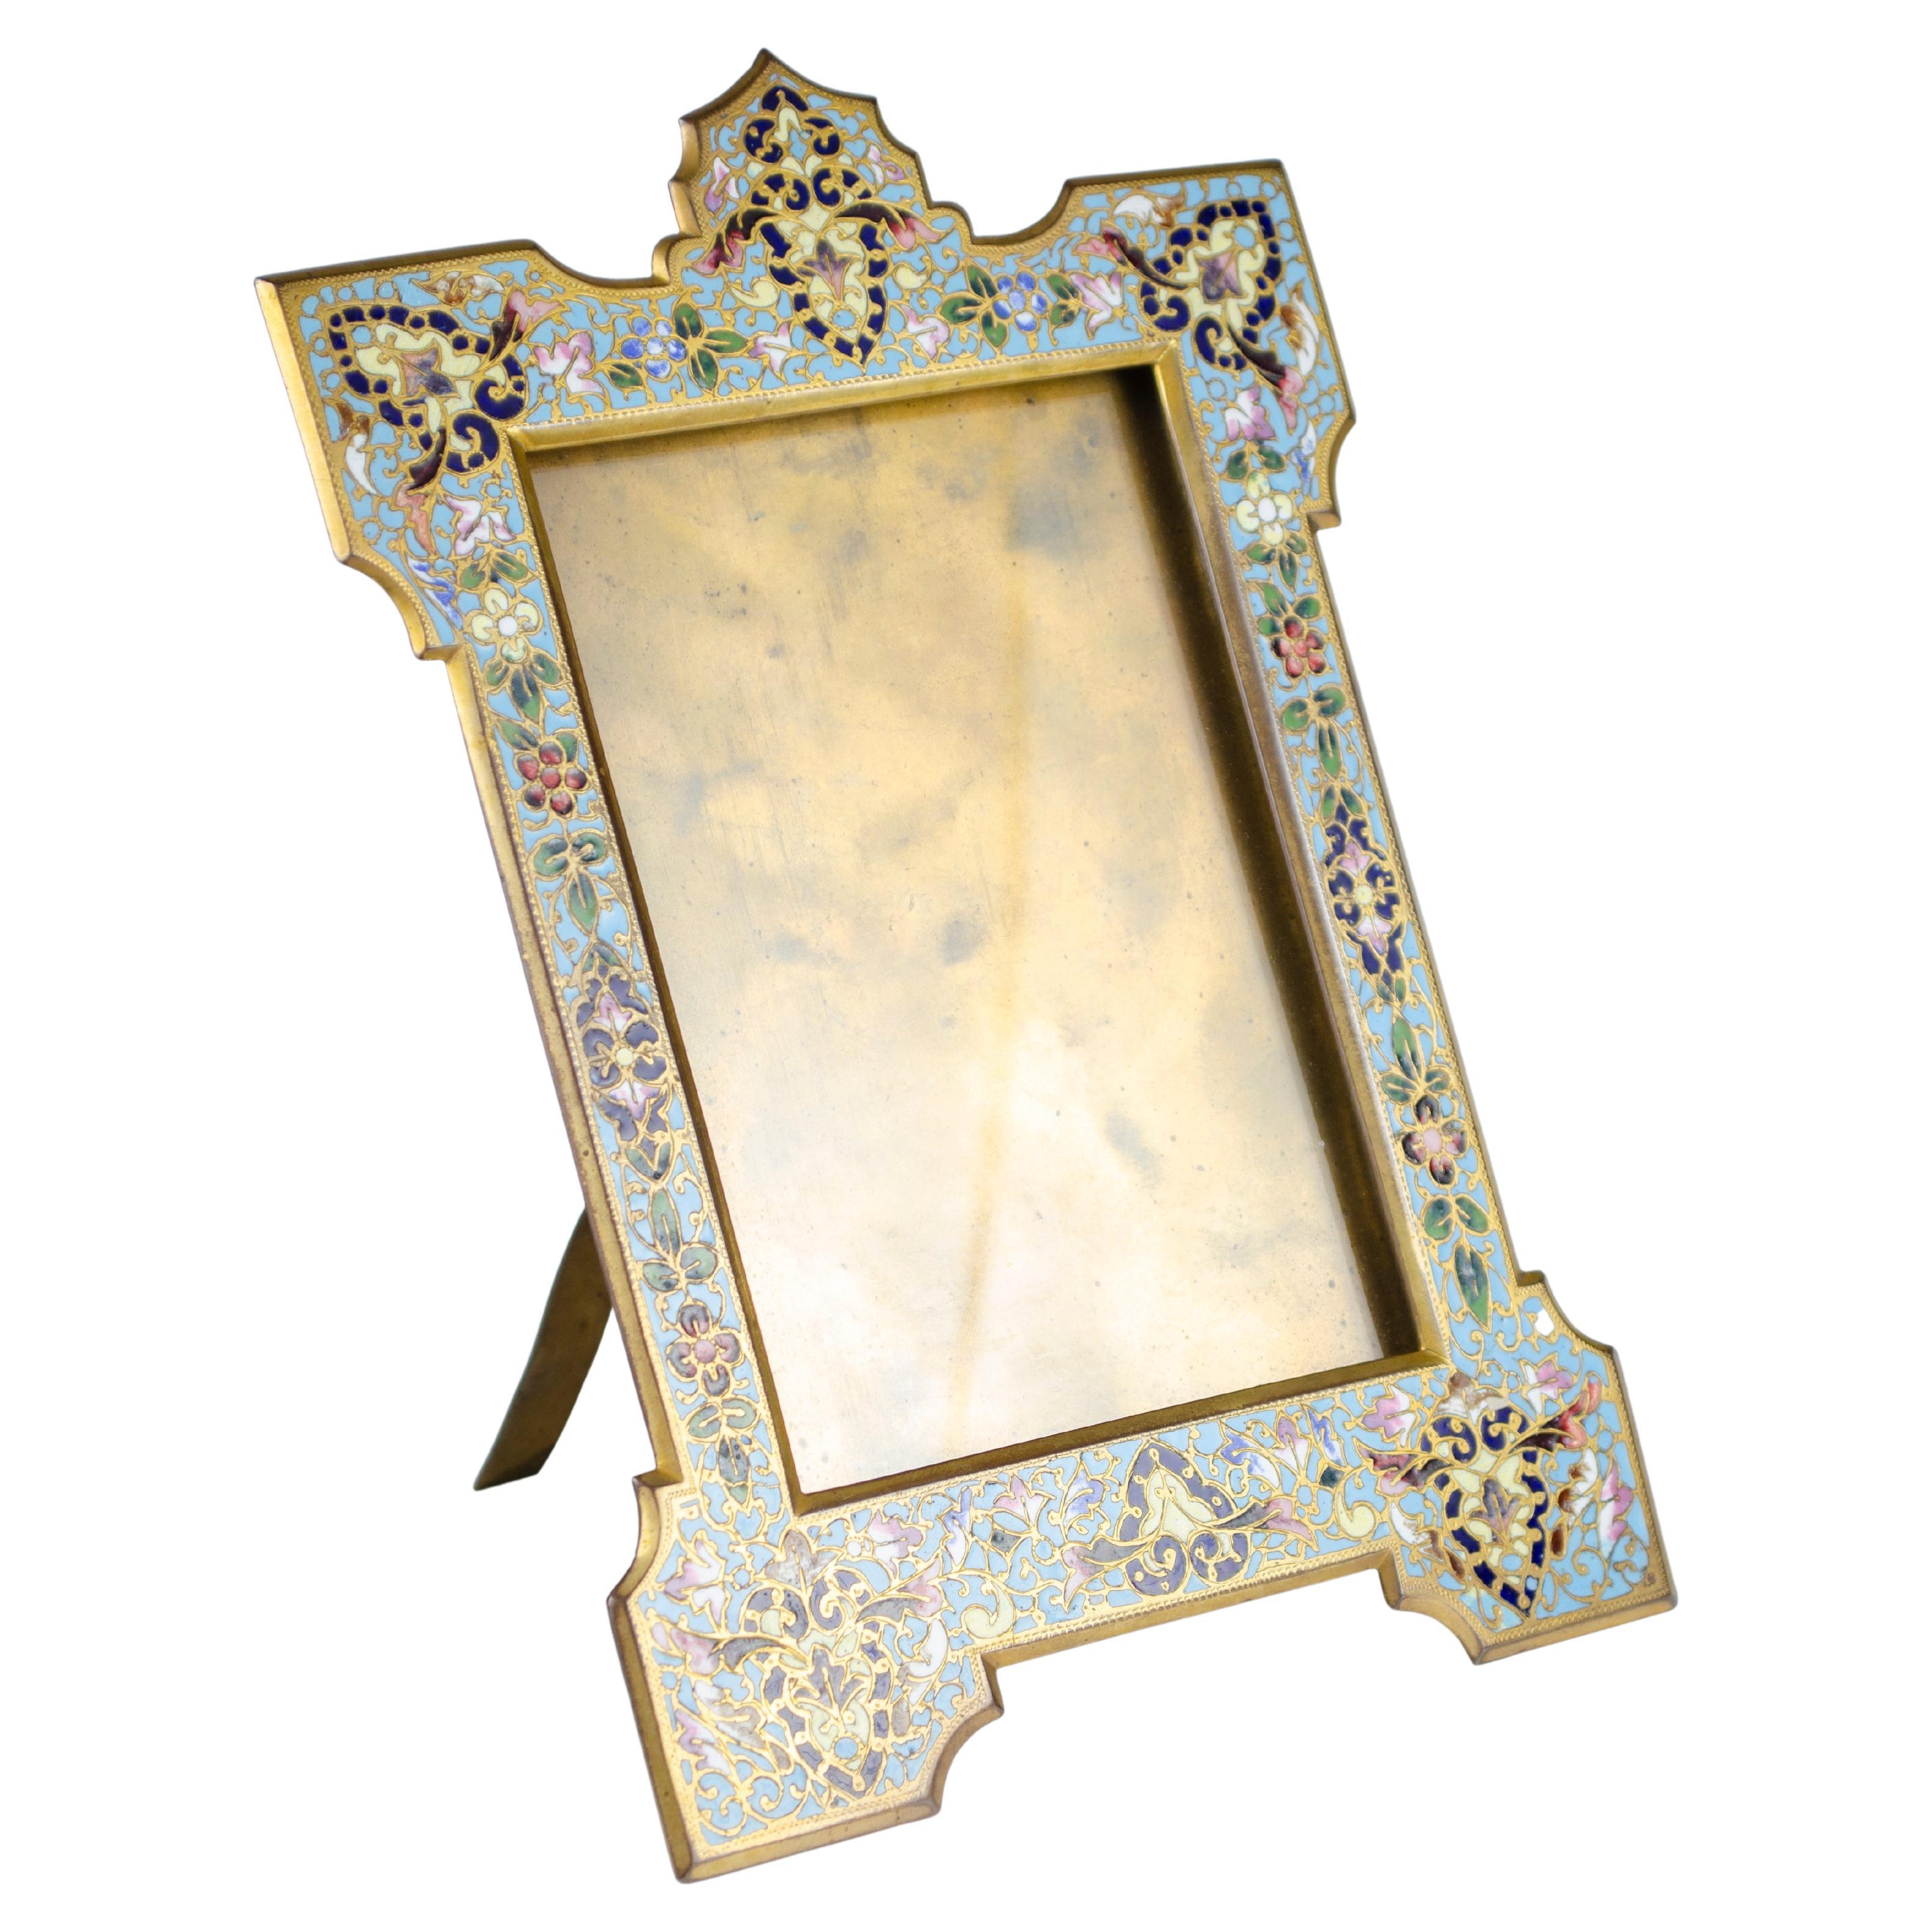 Napoleon III photo frame
original old photo frame
Cloissone technique and gilding
Circa 1900 Origin France
perfect condition
Natural wear of the time
The Napoleon III style had its heyday during the 1850s and 1880s. Emperor Napoleon wanted to